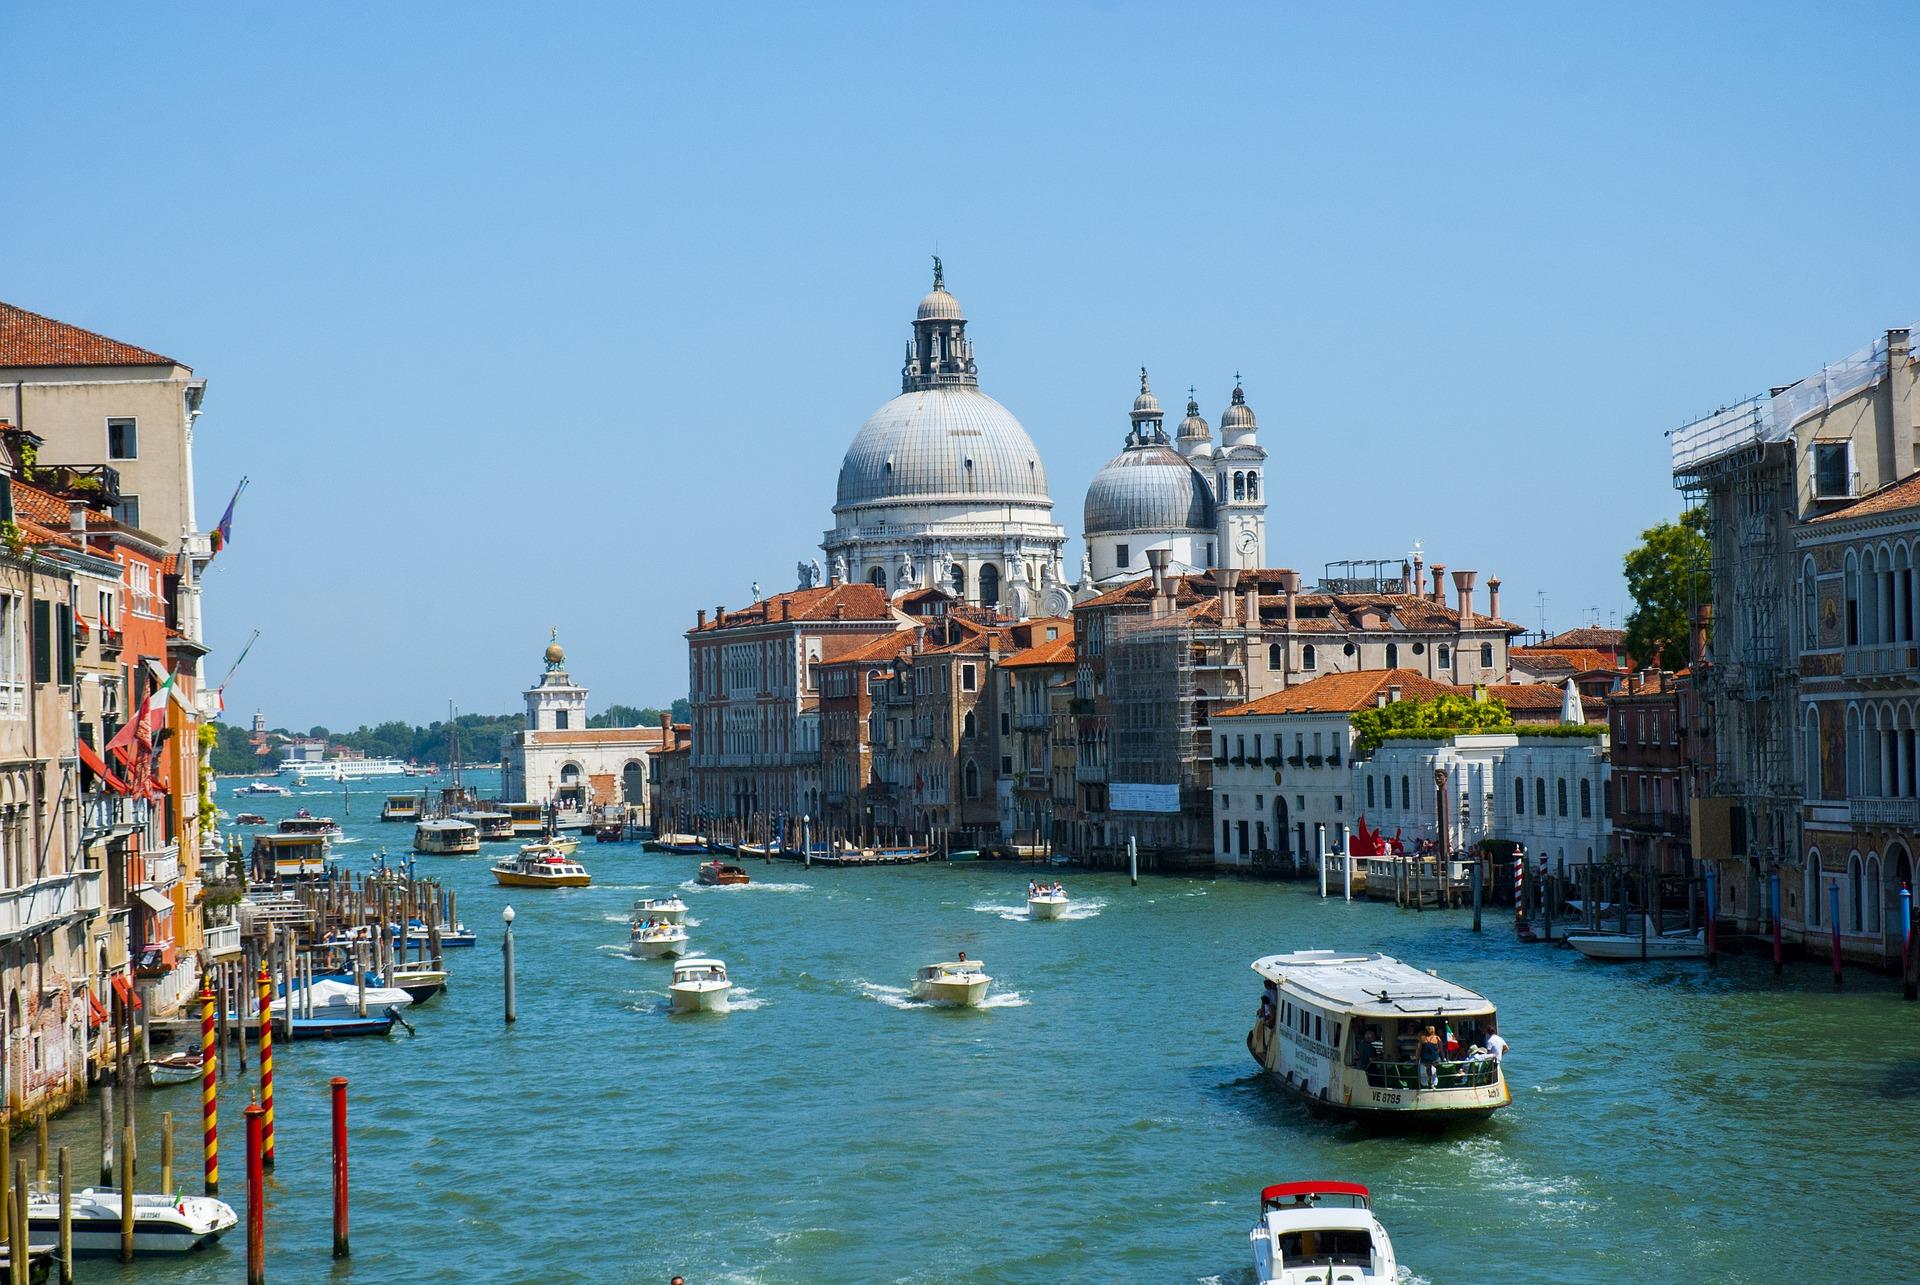 Venice from the deck of a gondola – image 2